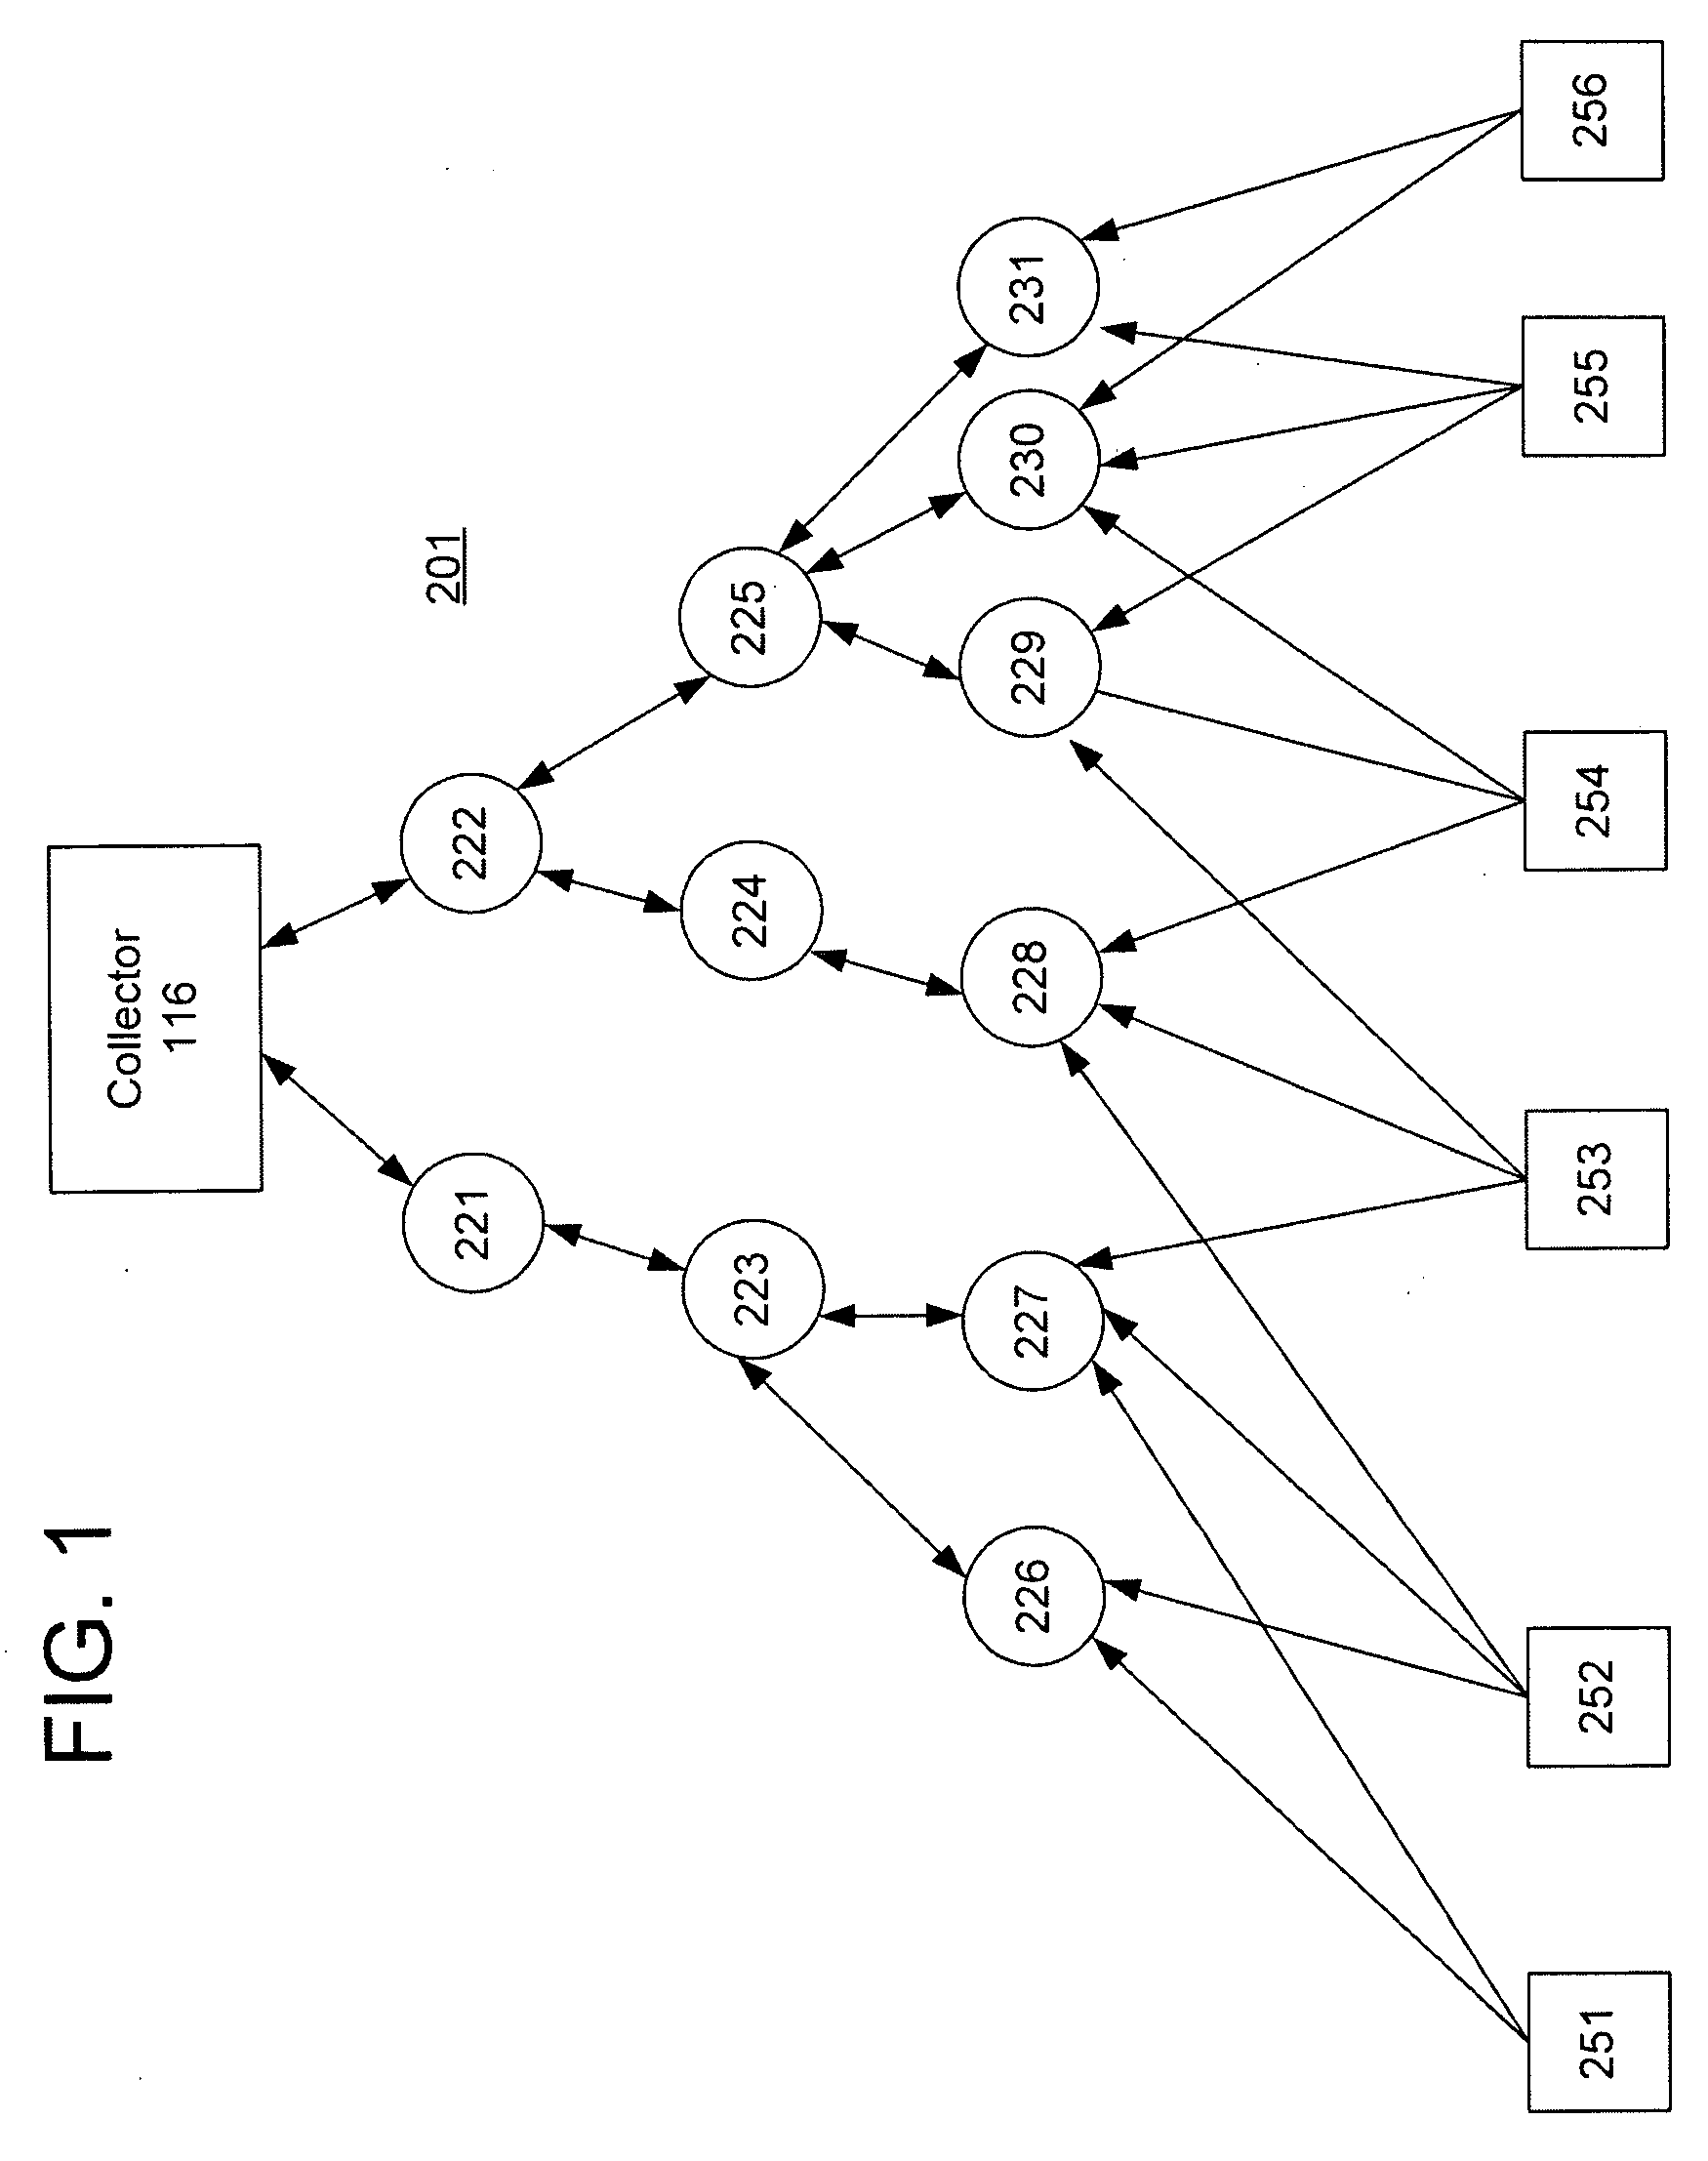 Optimized data collection in a wireless fixed network metering system